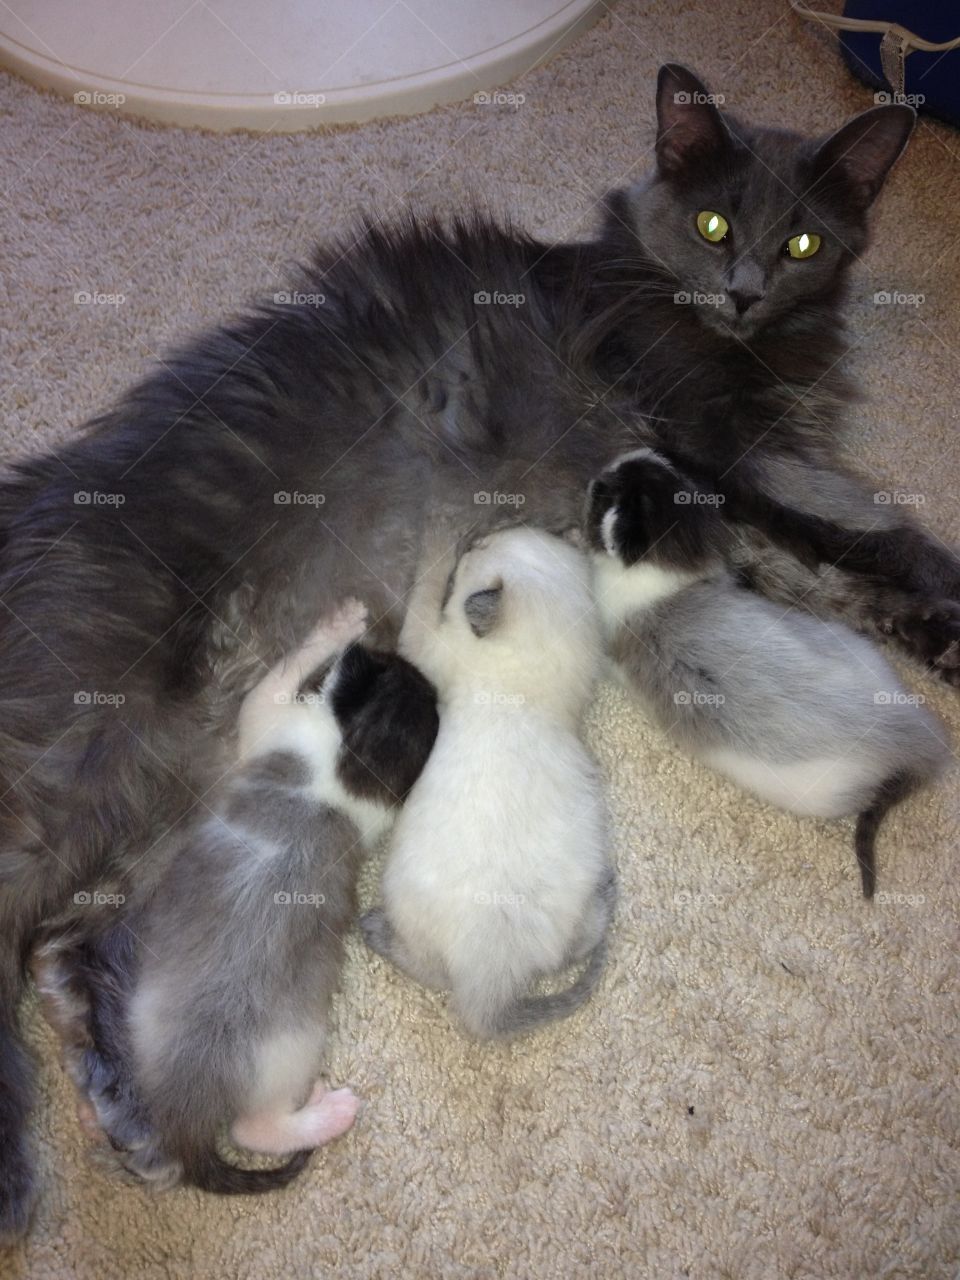 Momma kitty and babies